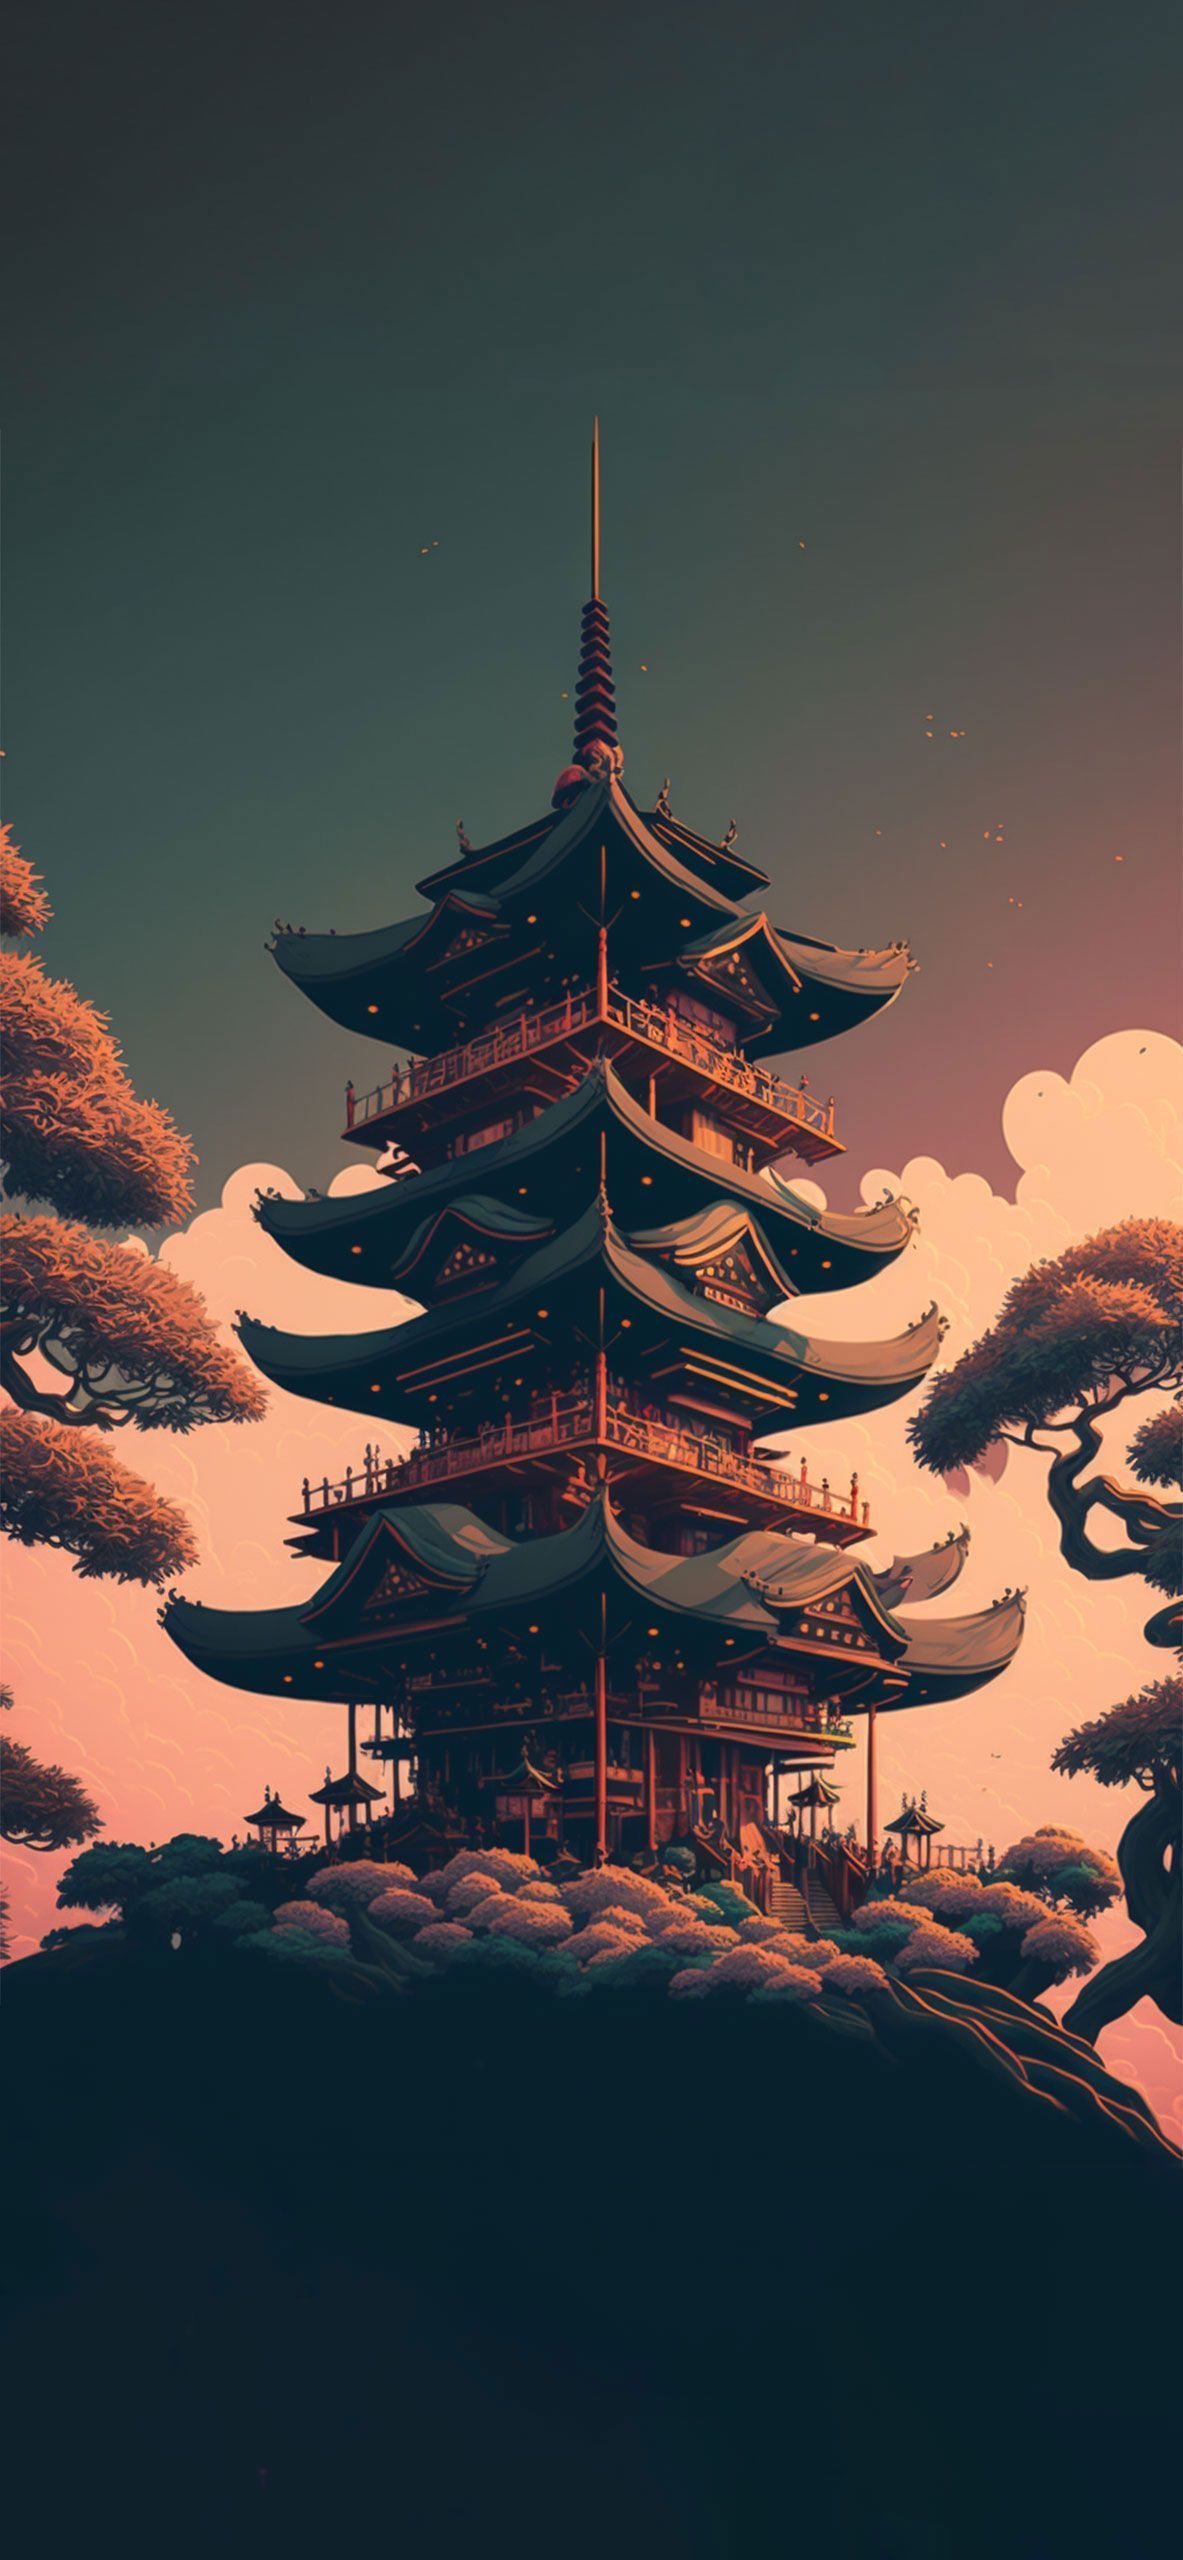 A painting of an oriental pagoda - Japan, architecture, Japanese